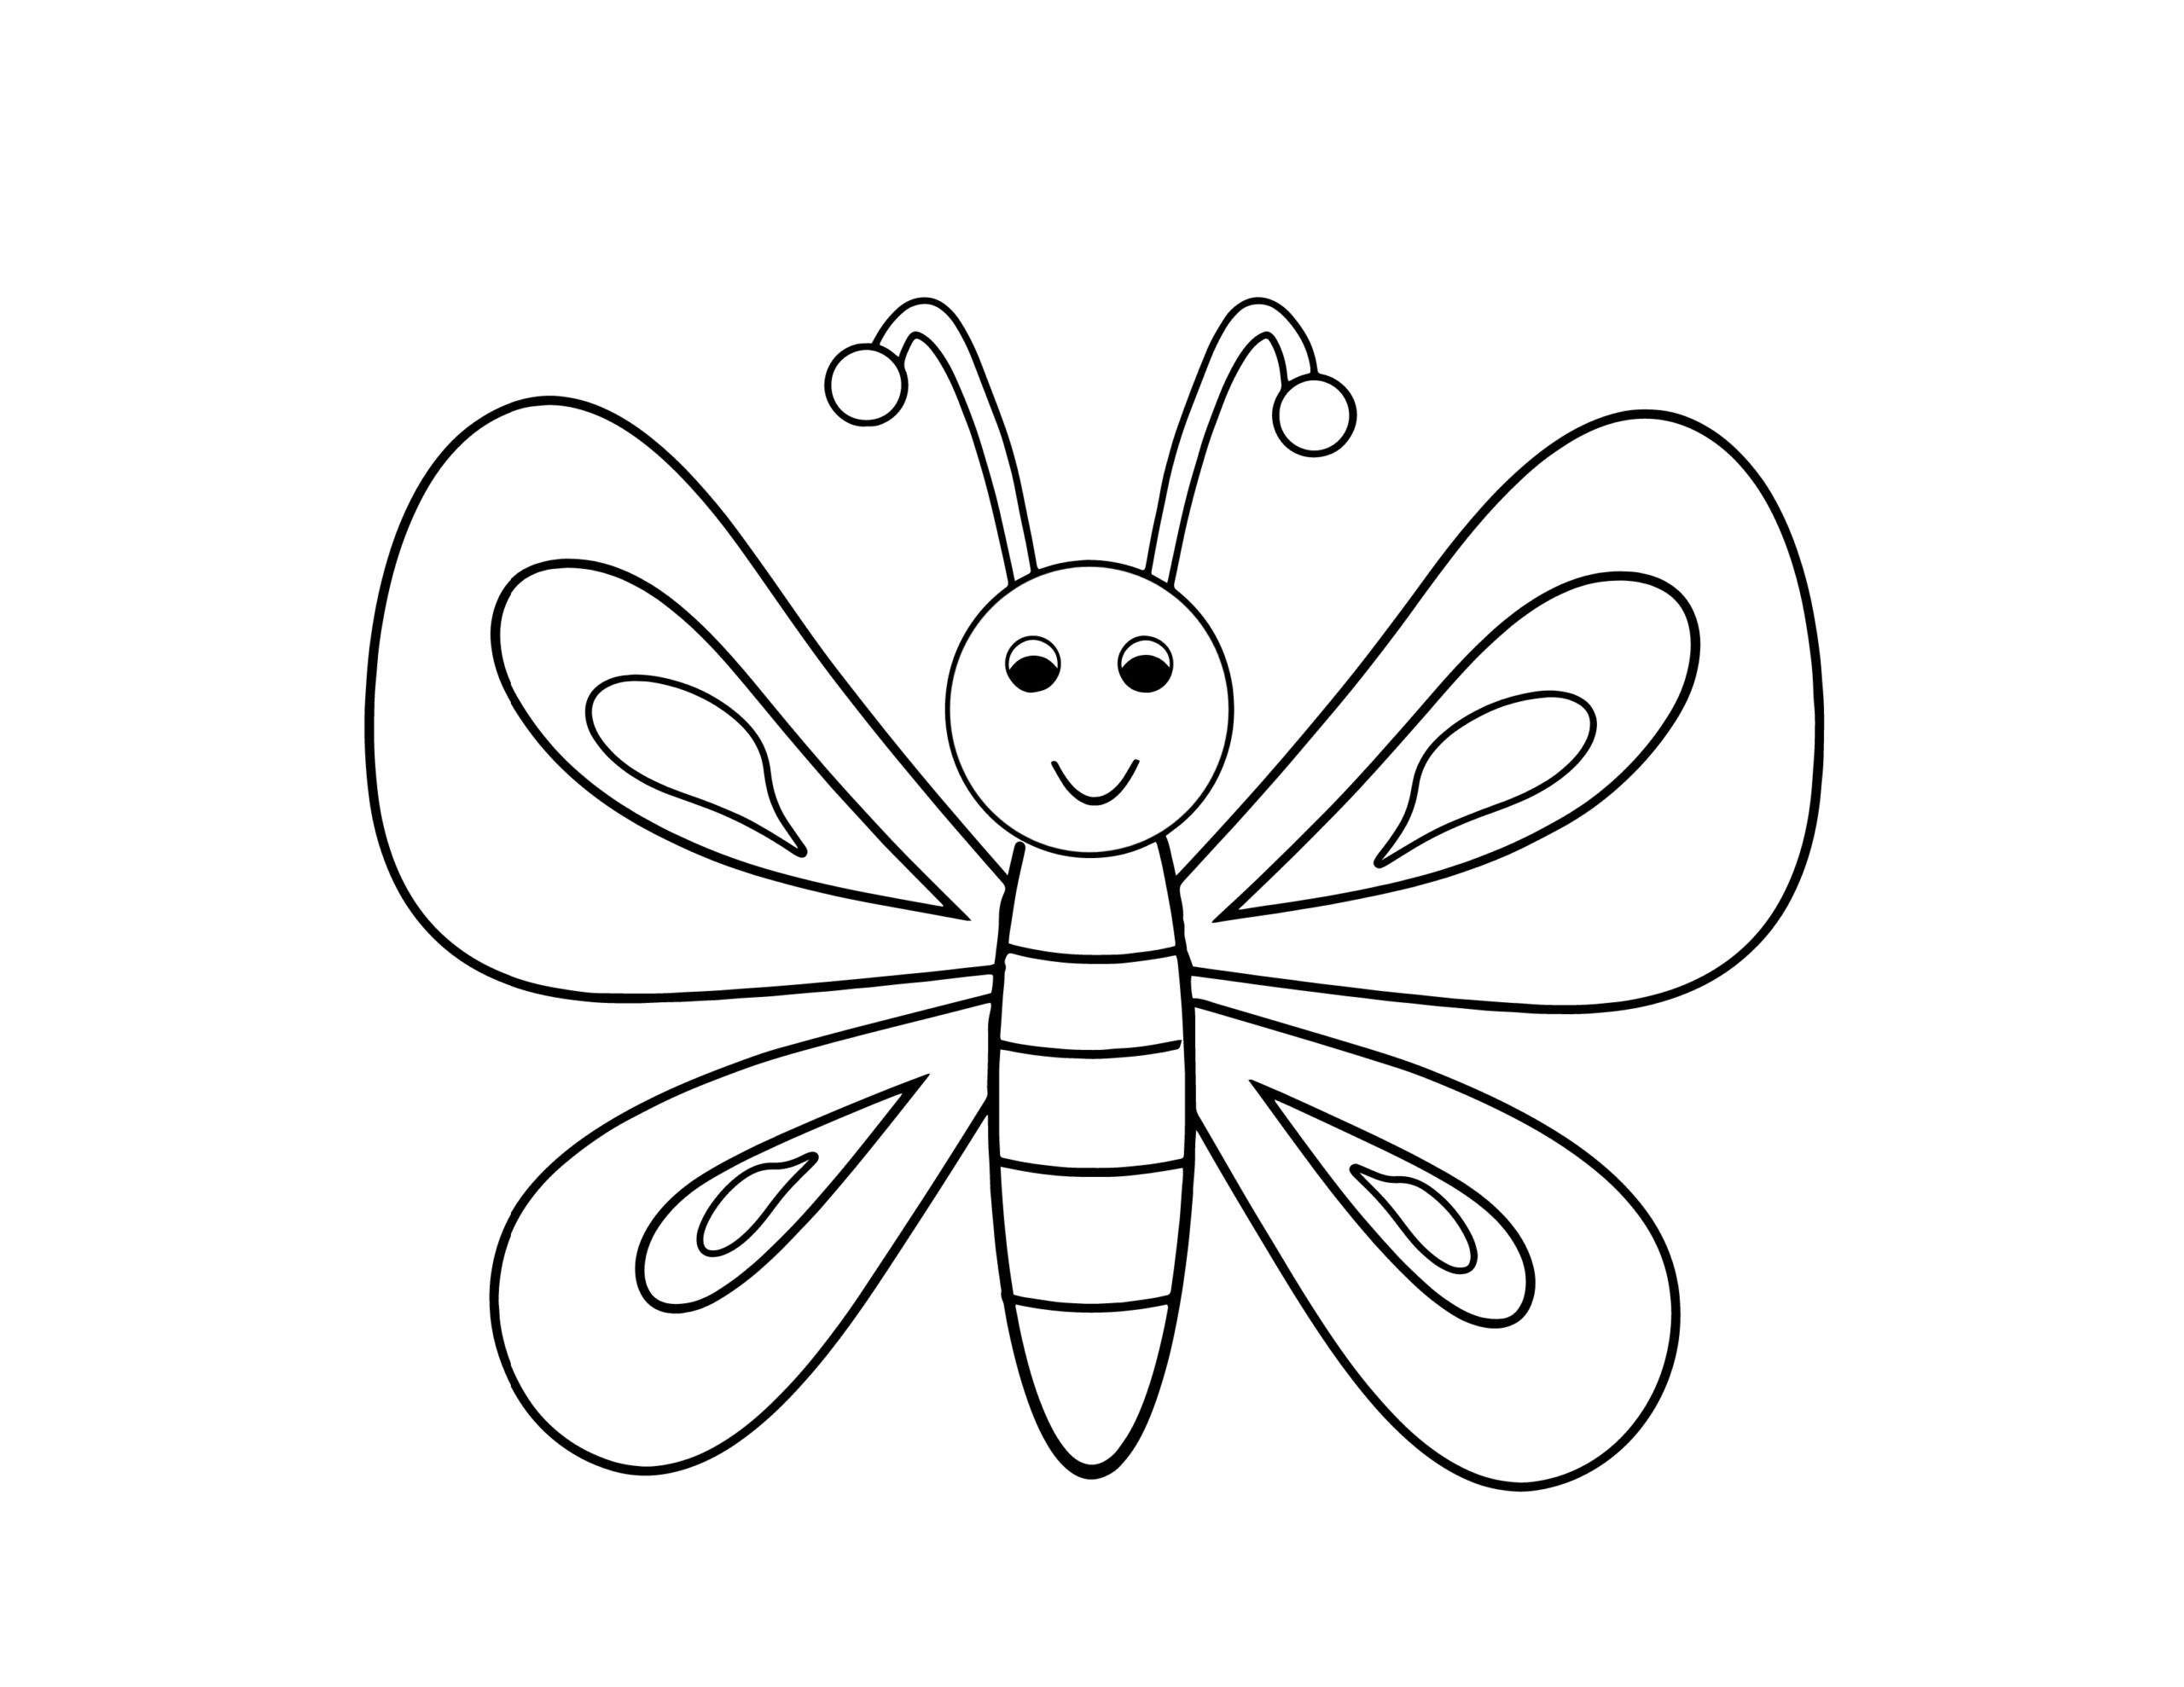 Butterfly coloring page for kids